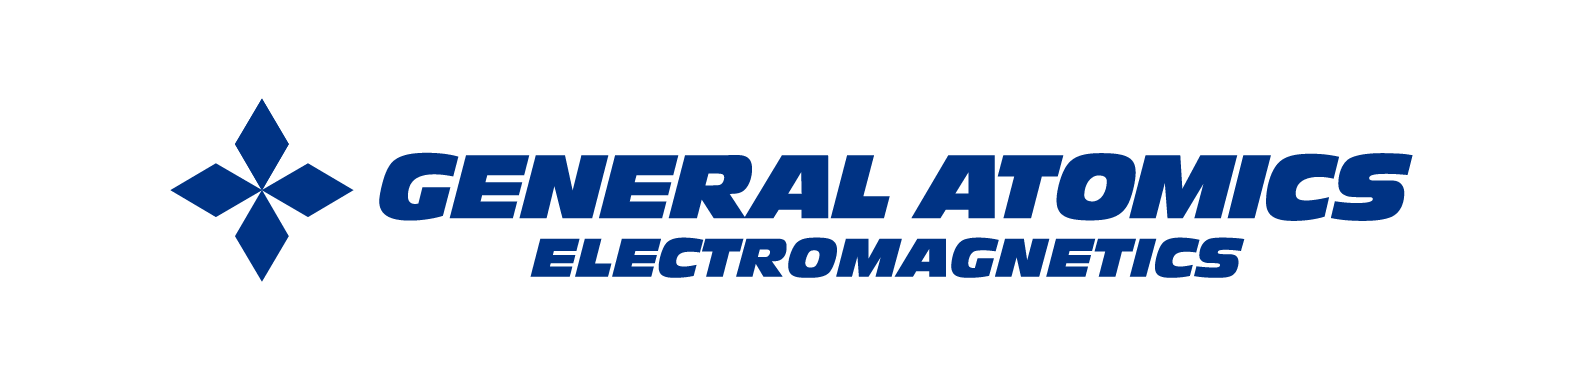 General Atomics Electromagnetic Systems